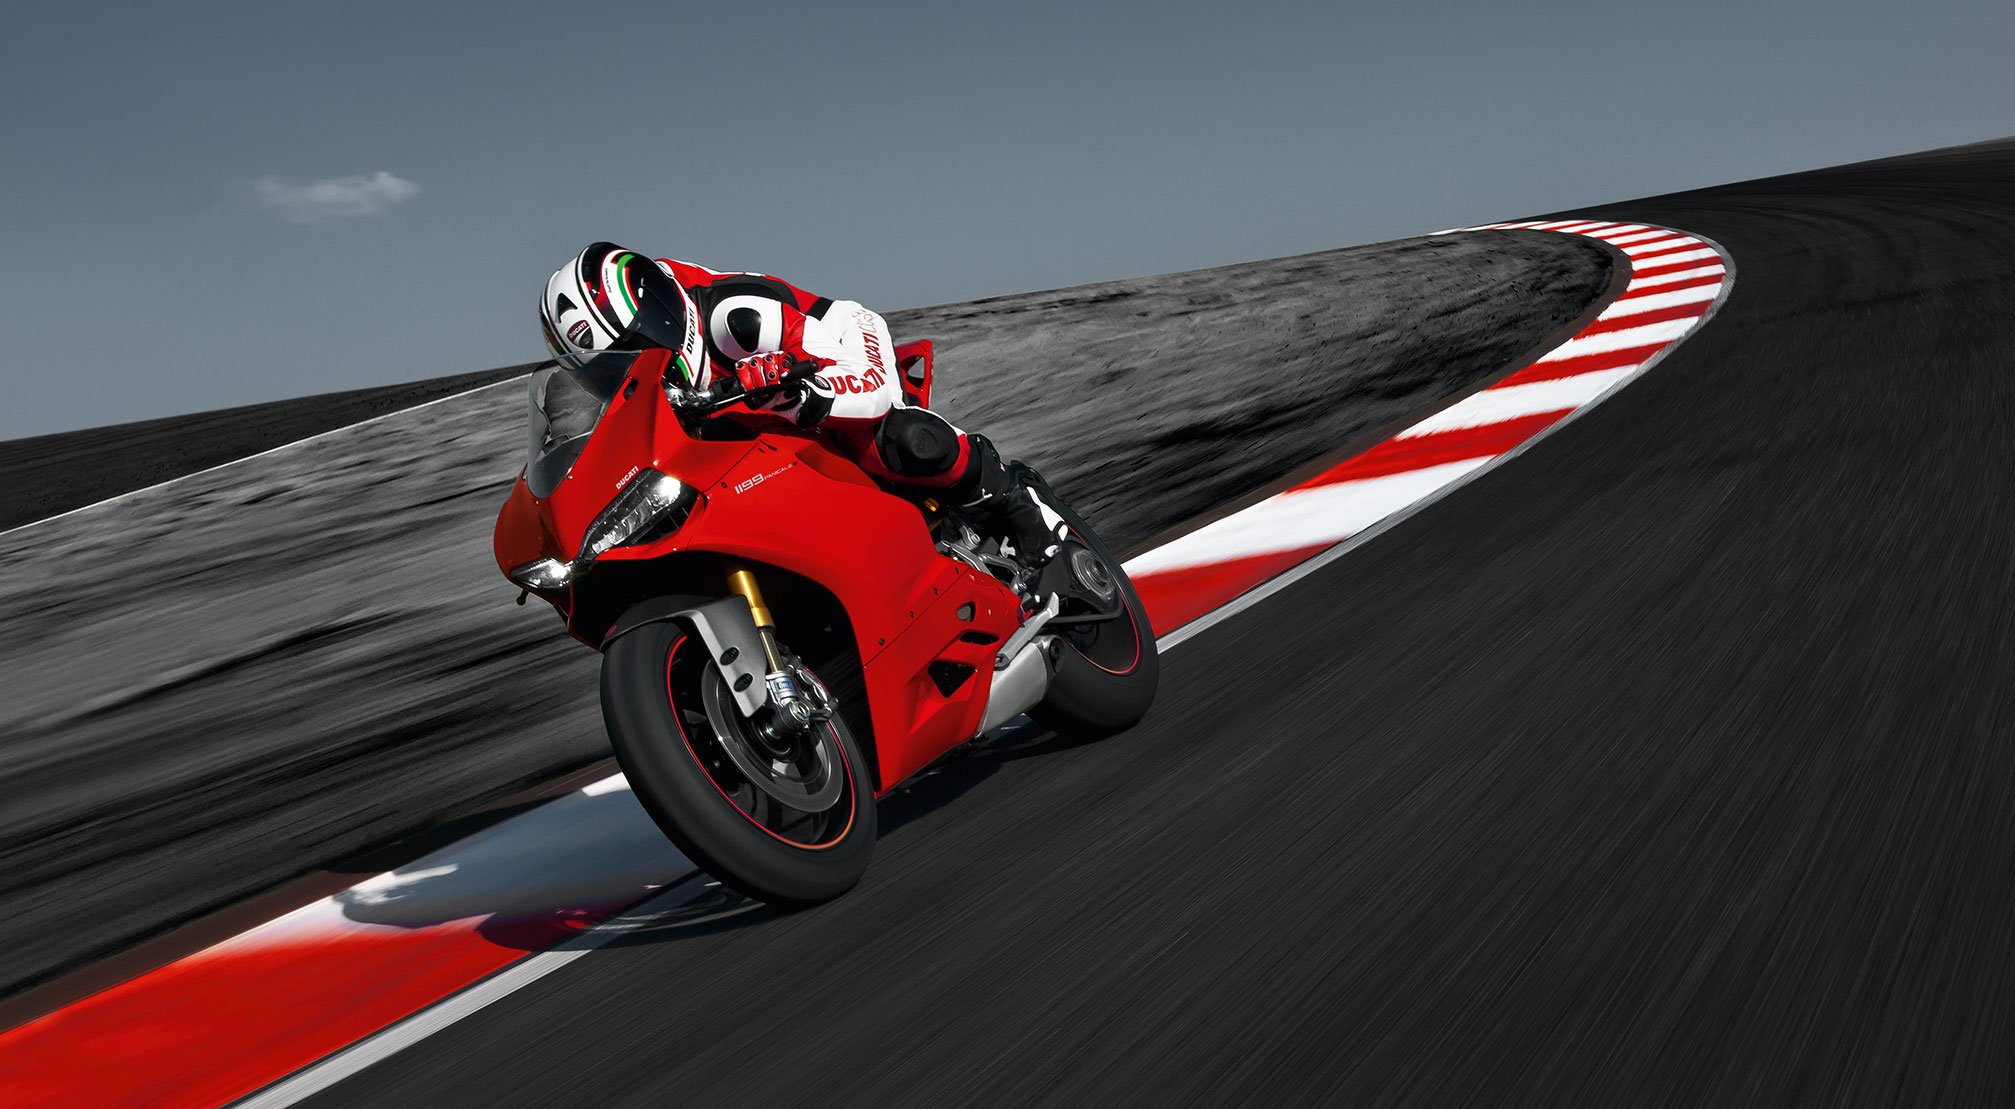 2015 Ducati 1299 Panigale Wallpapers Find best latest